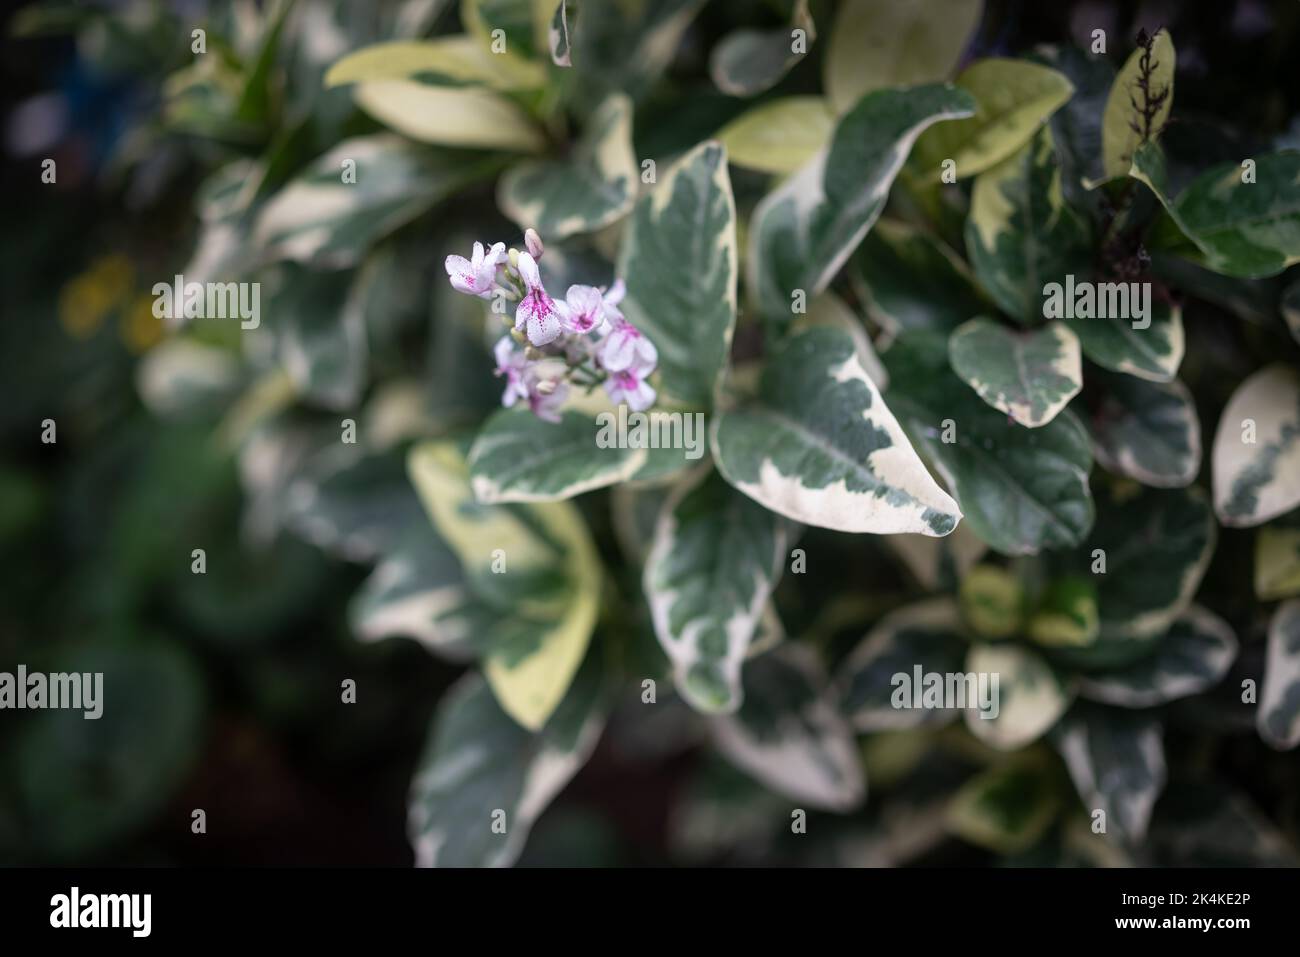 Flowers of purple false eranthemum with variegated white and green leaves Stock Photo